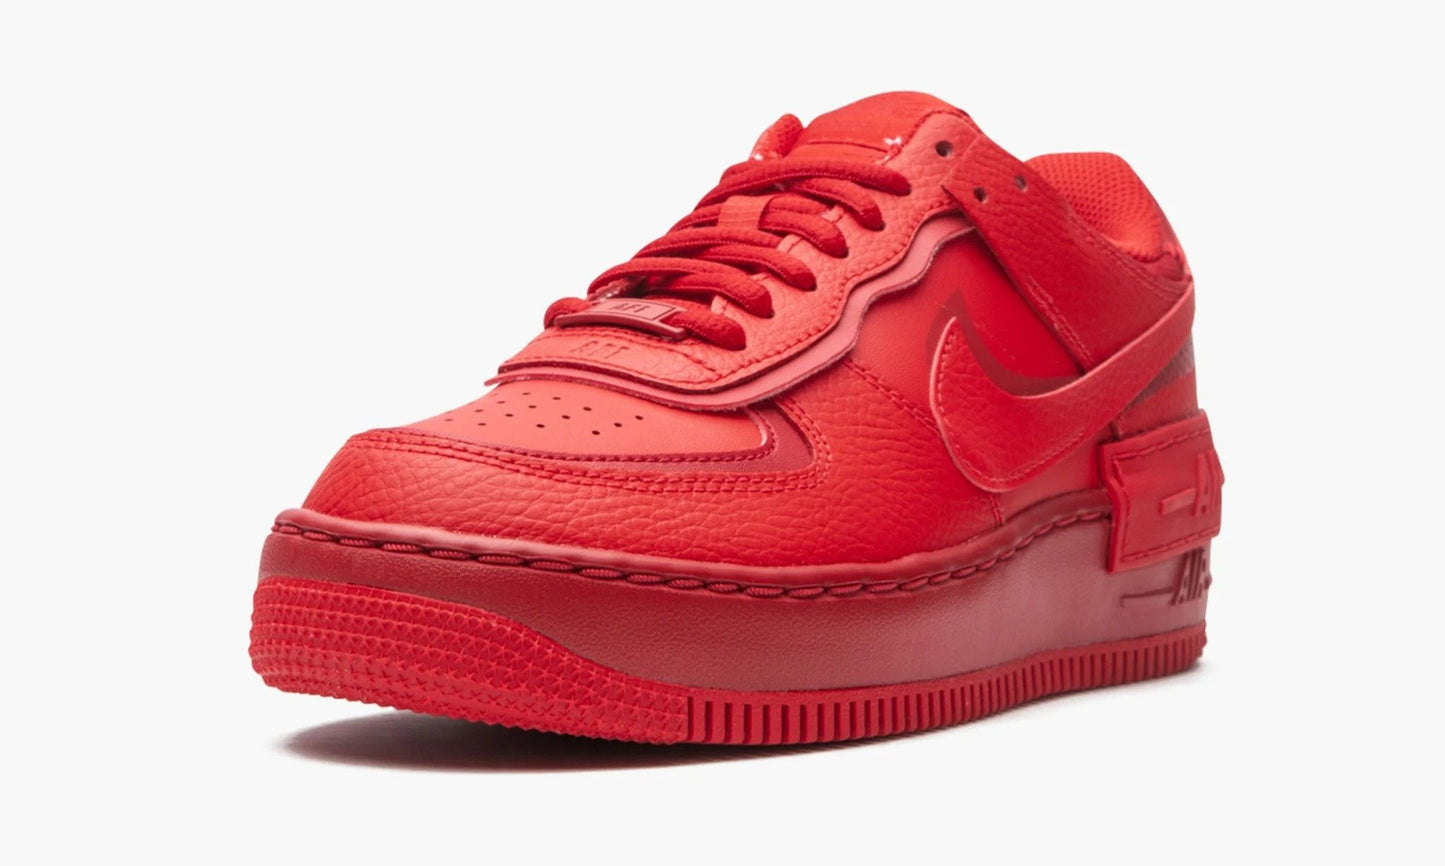 Force 1 Low Shadow WMNS “Triple Red”